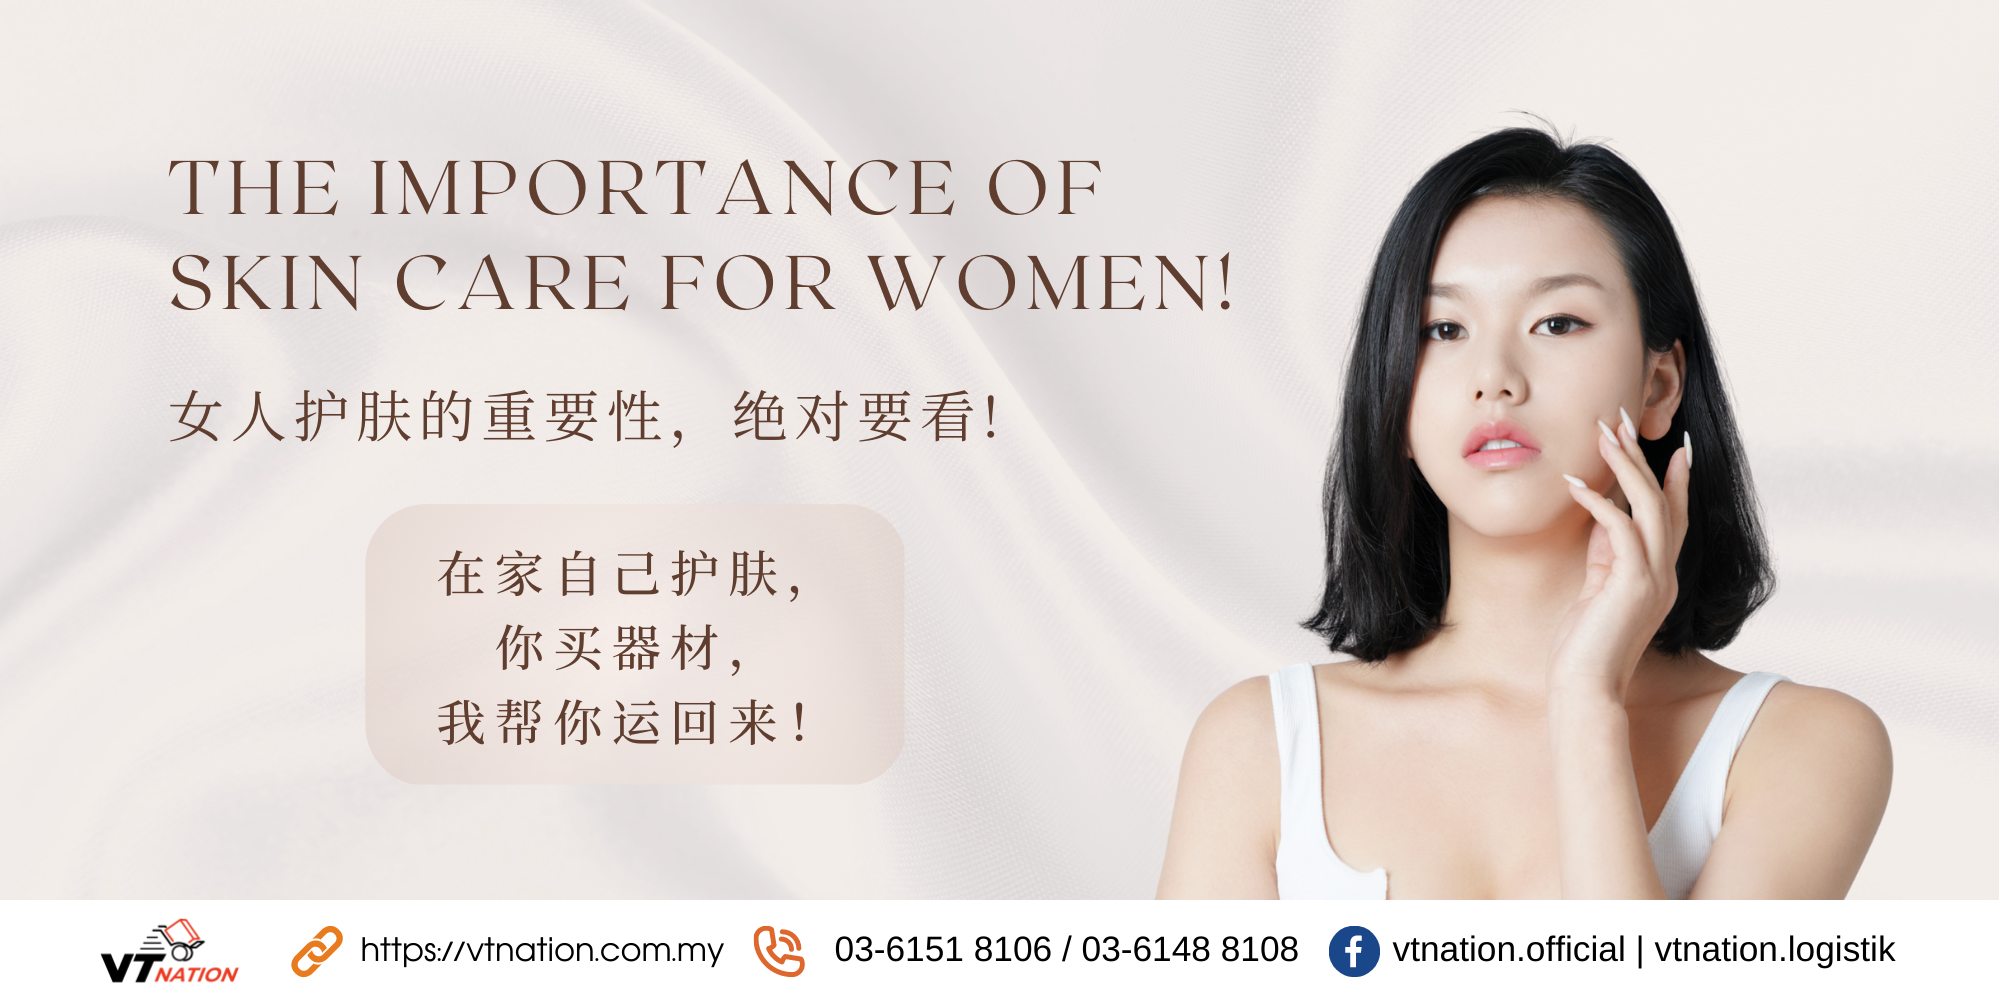 The importance of skin care for women.